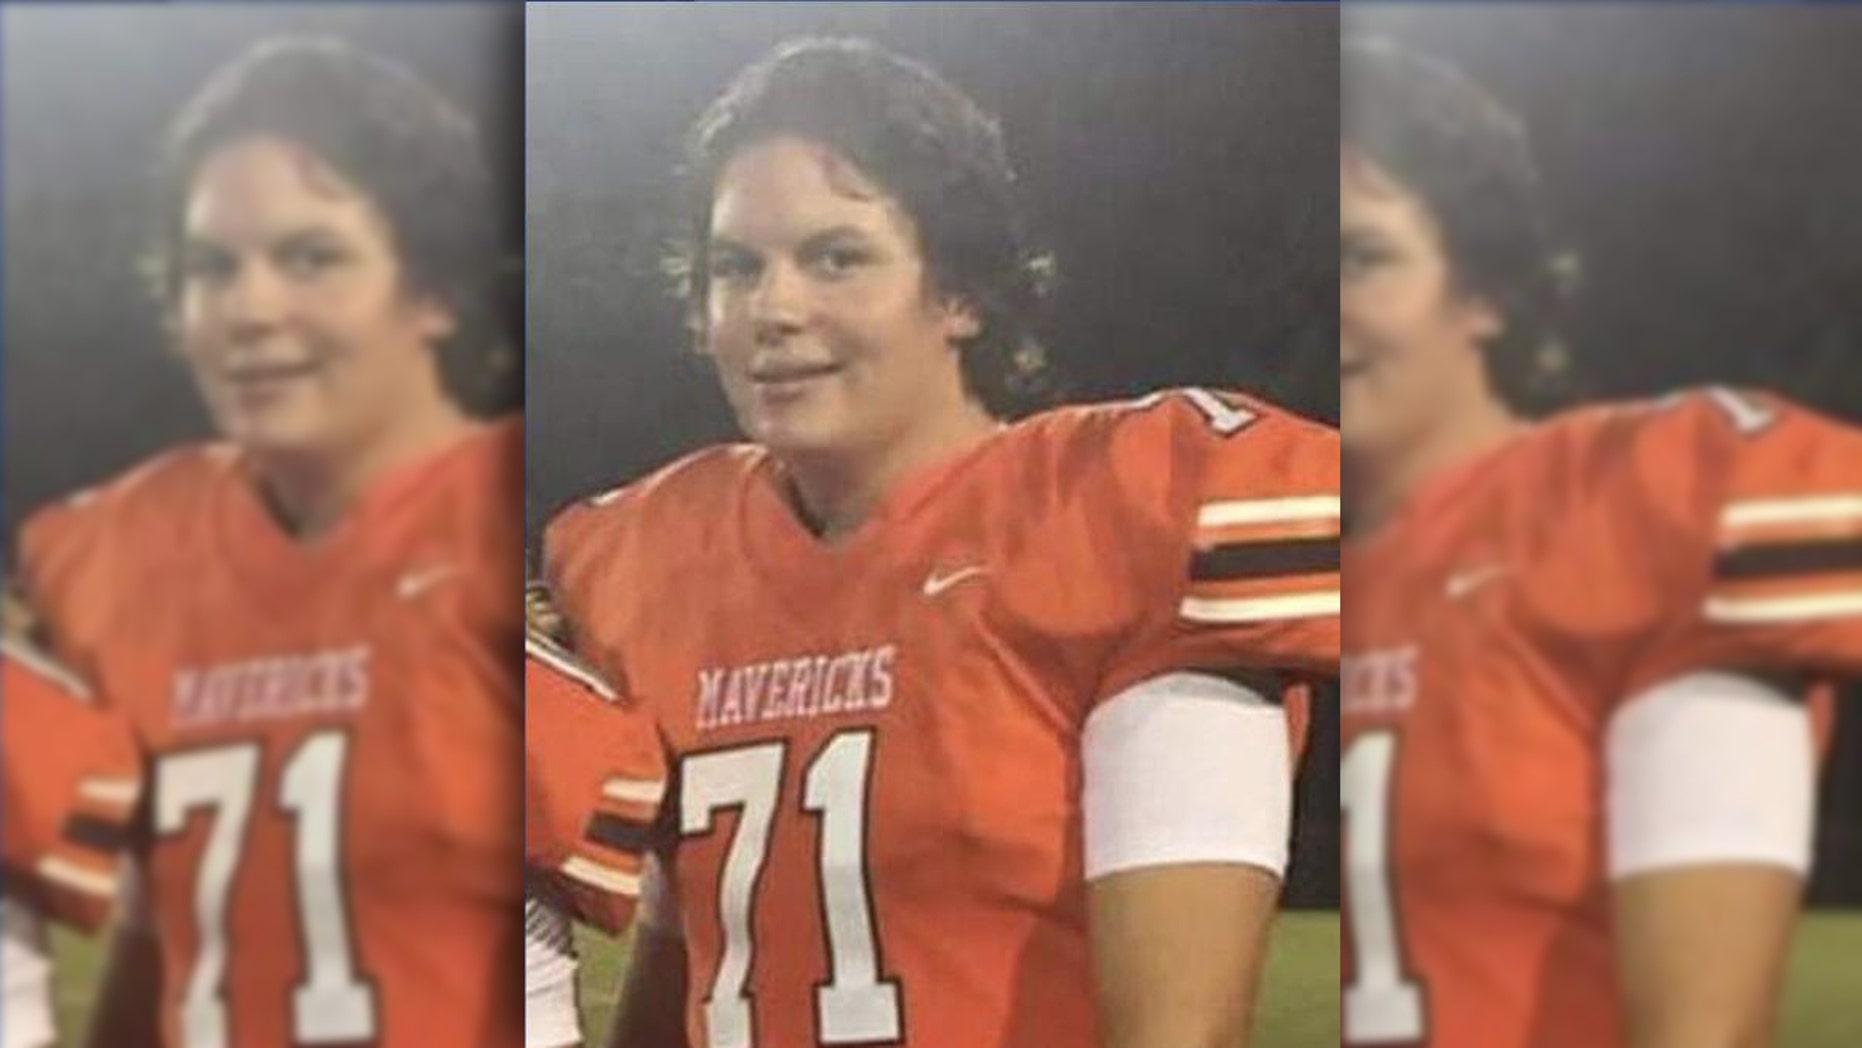 South Carolina high school football player and honor roll student killed in drug deal gone bad, deputies say